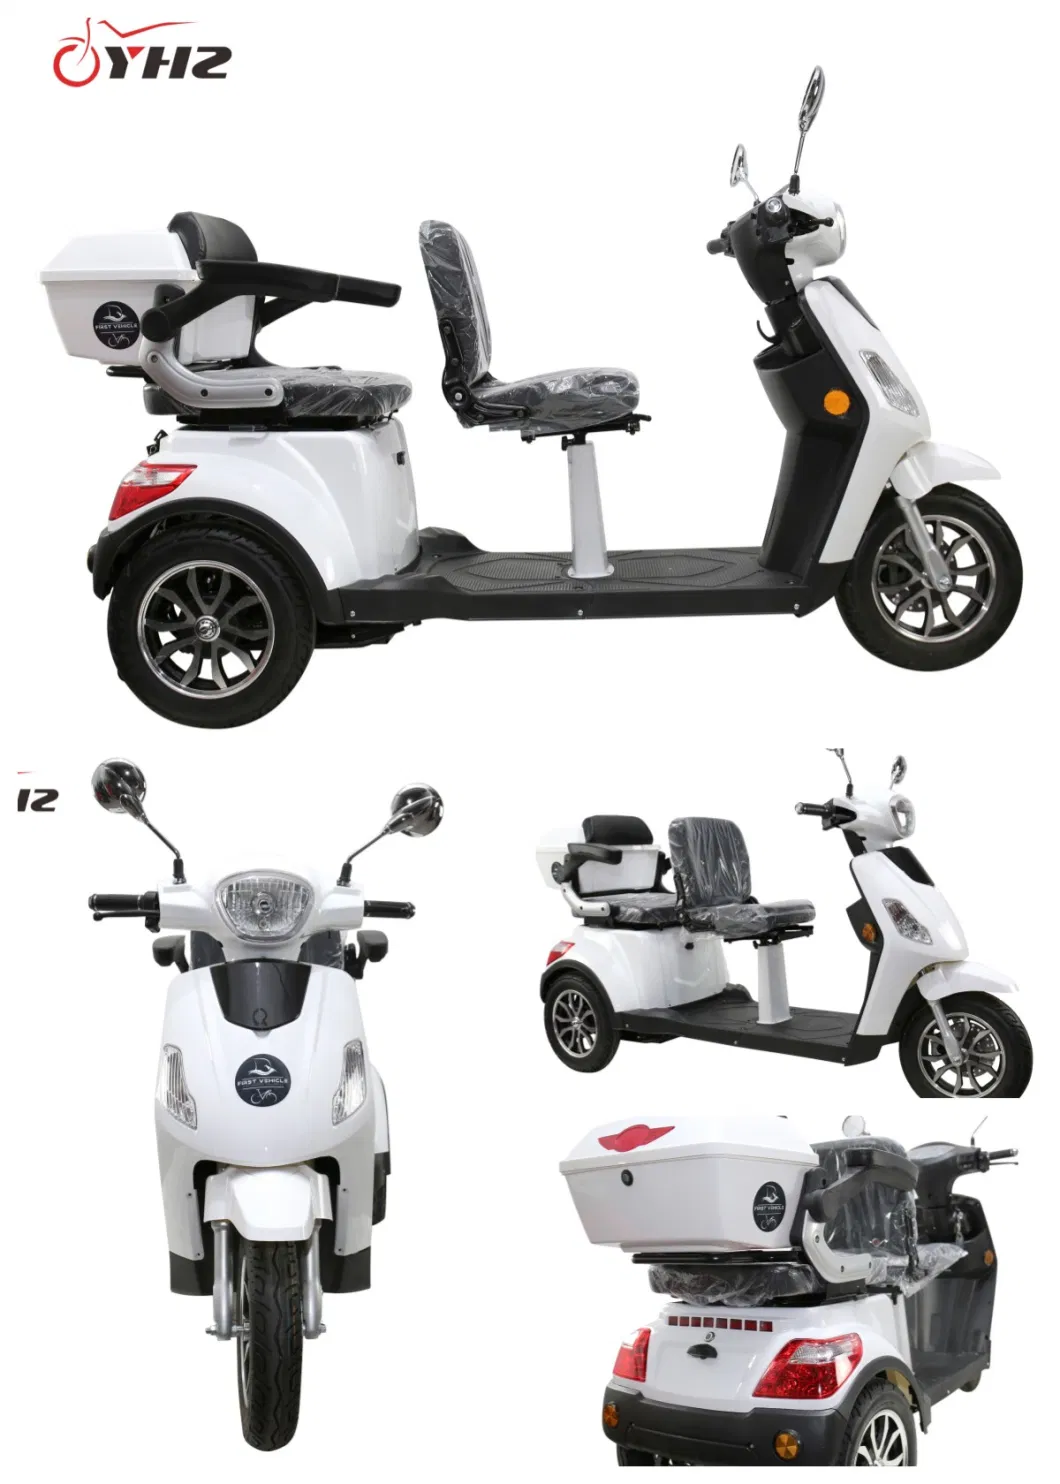 Anti-Slip 3-Wheel Design Safety Driving Mobility Moped Electric Motorcycle